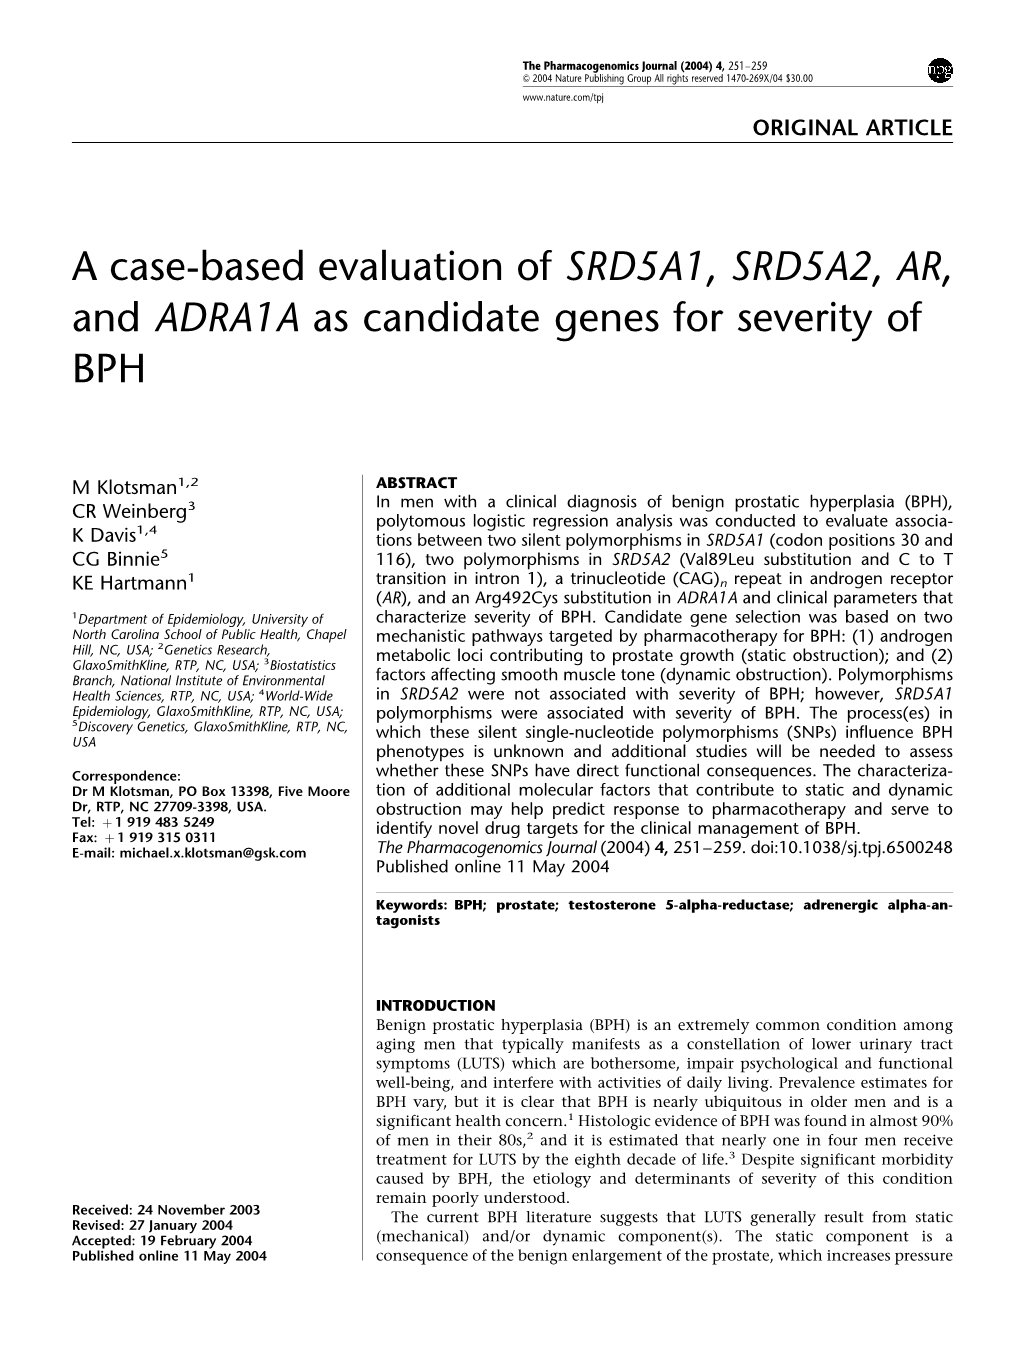 A Case-Based Evaluation of SRD5A1, SRD5A2, AR, and ADRA1A As Candidate Genes for Severity of BPH